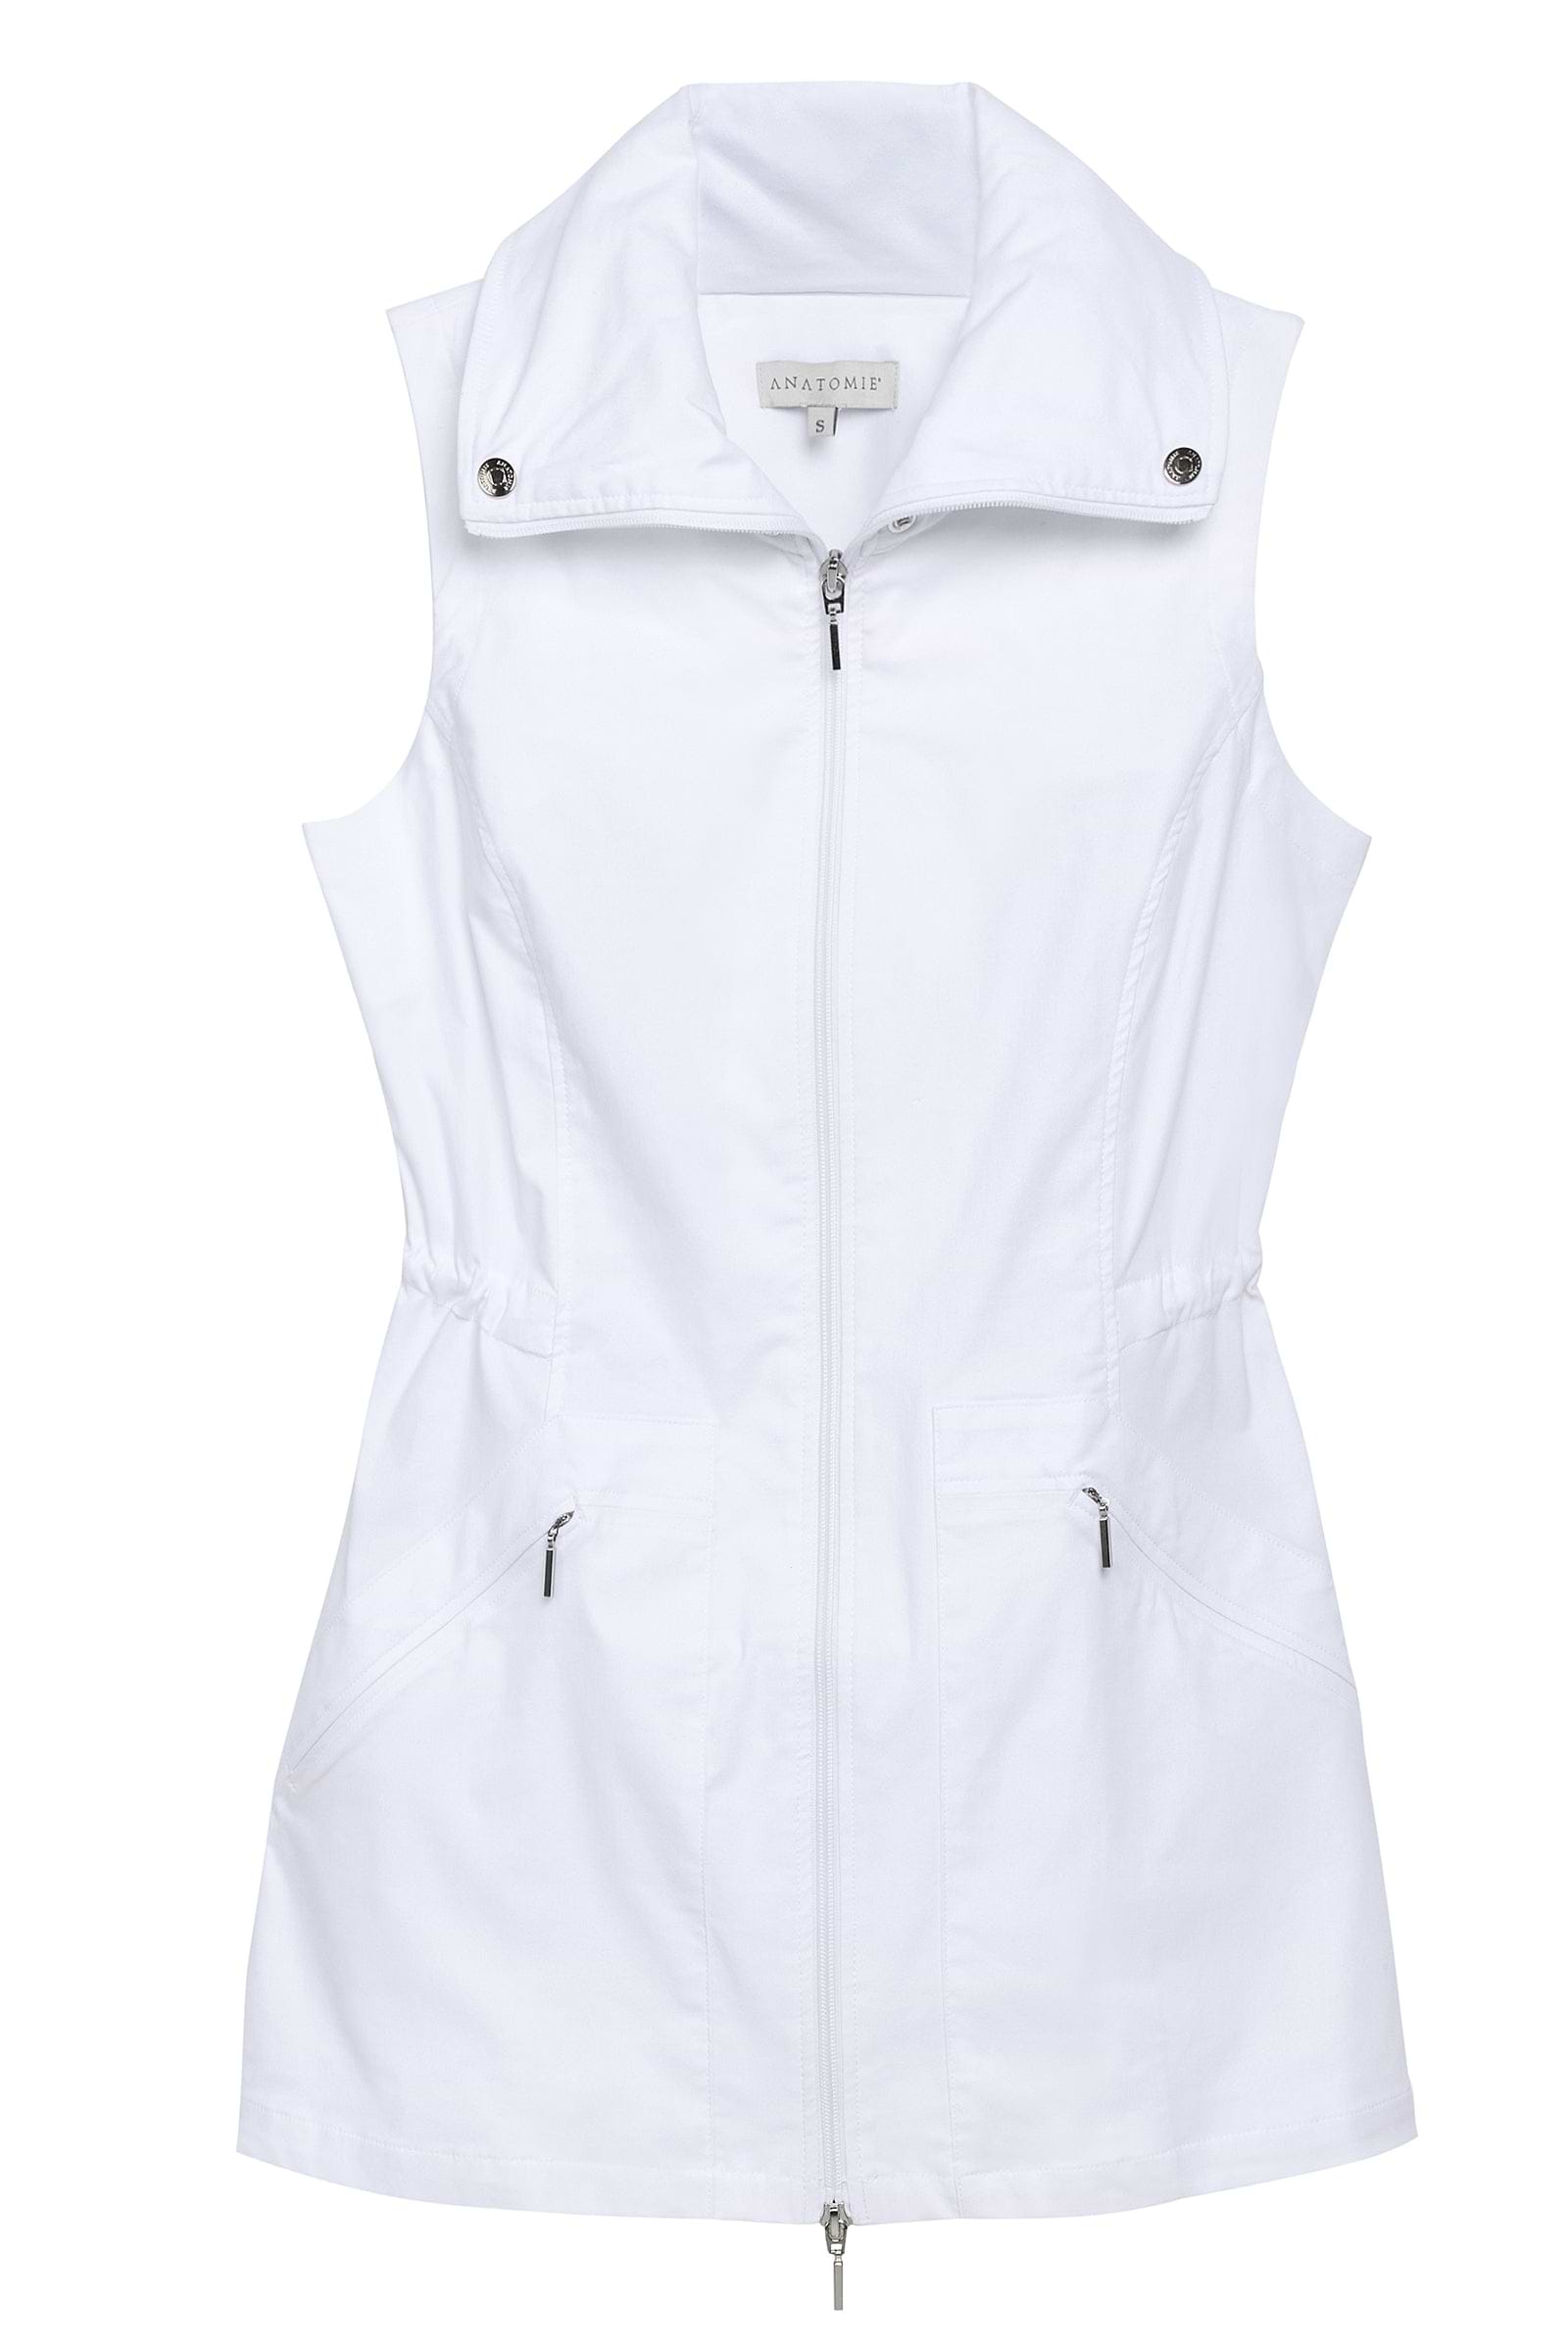 The Best Travel Vest. Flat Lay of a Delaney Travel Vest in White